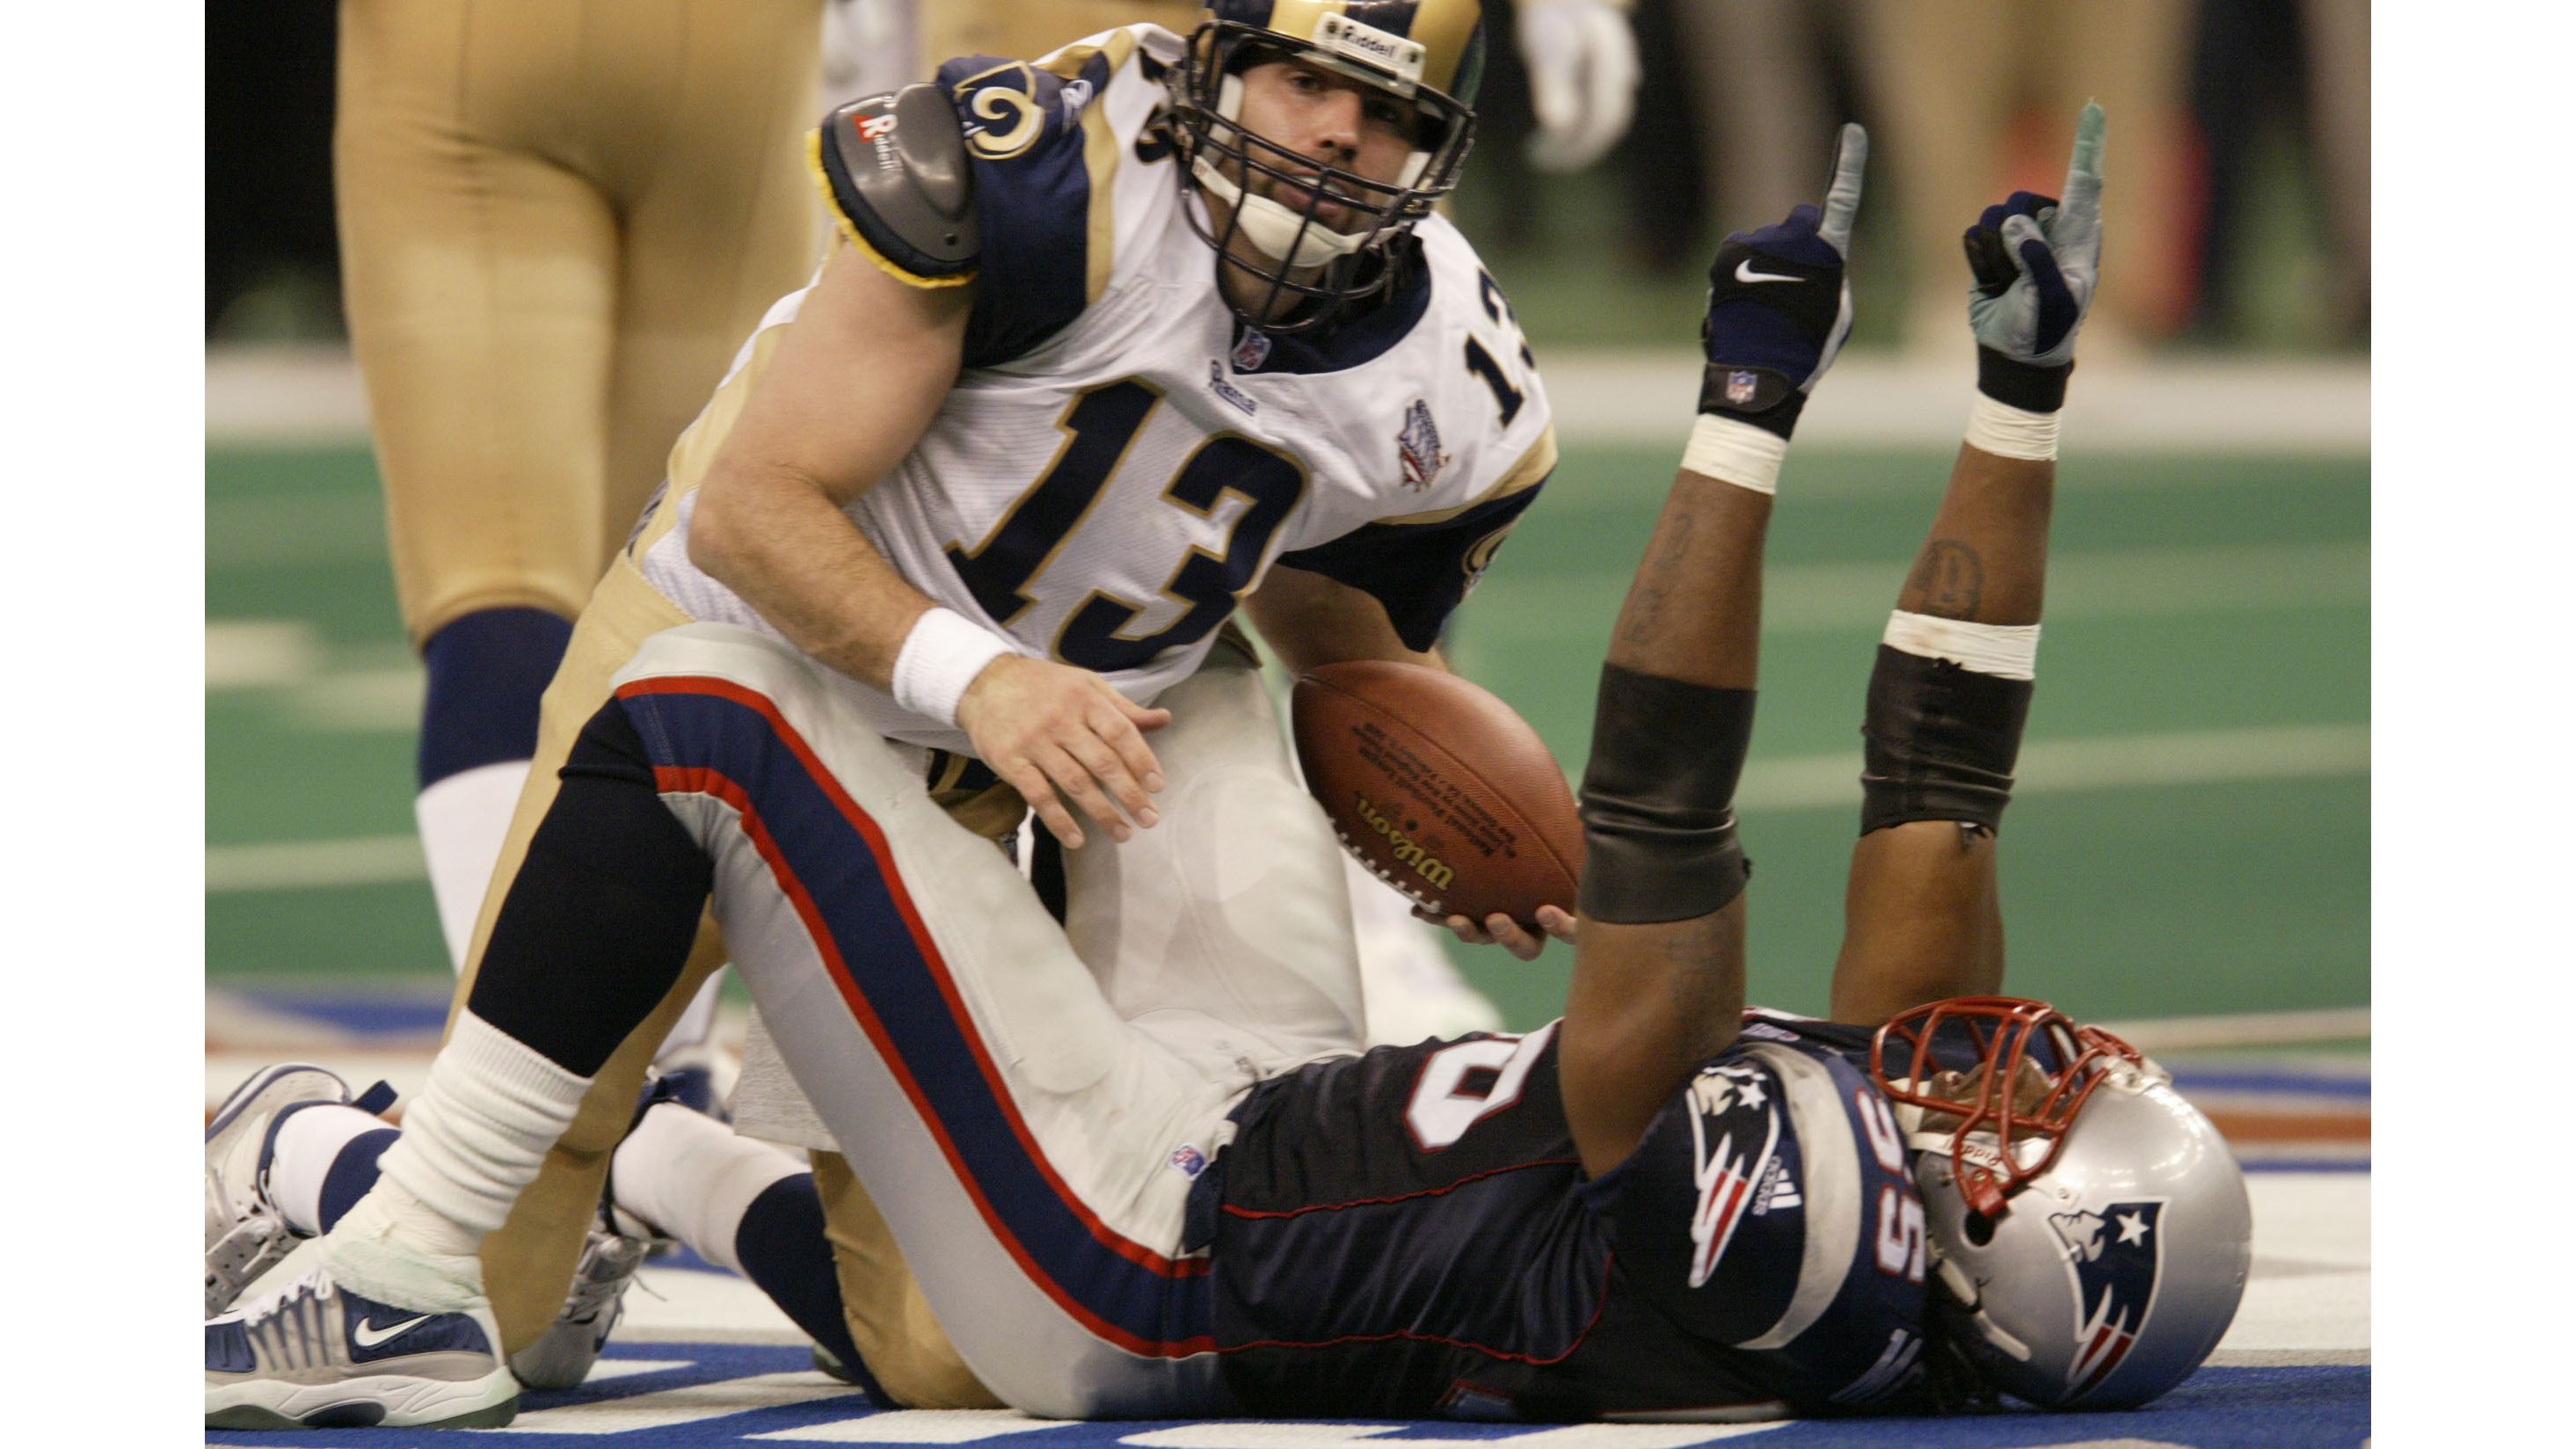 The last time the Patriots were such heavy underdogs? Super Bowl XXXVI  against the Rams in 2002.